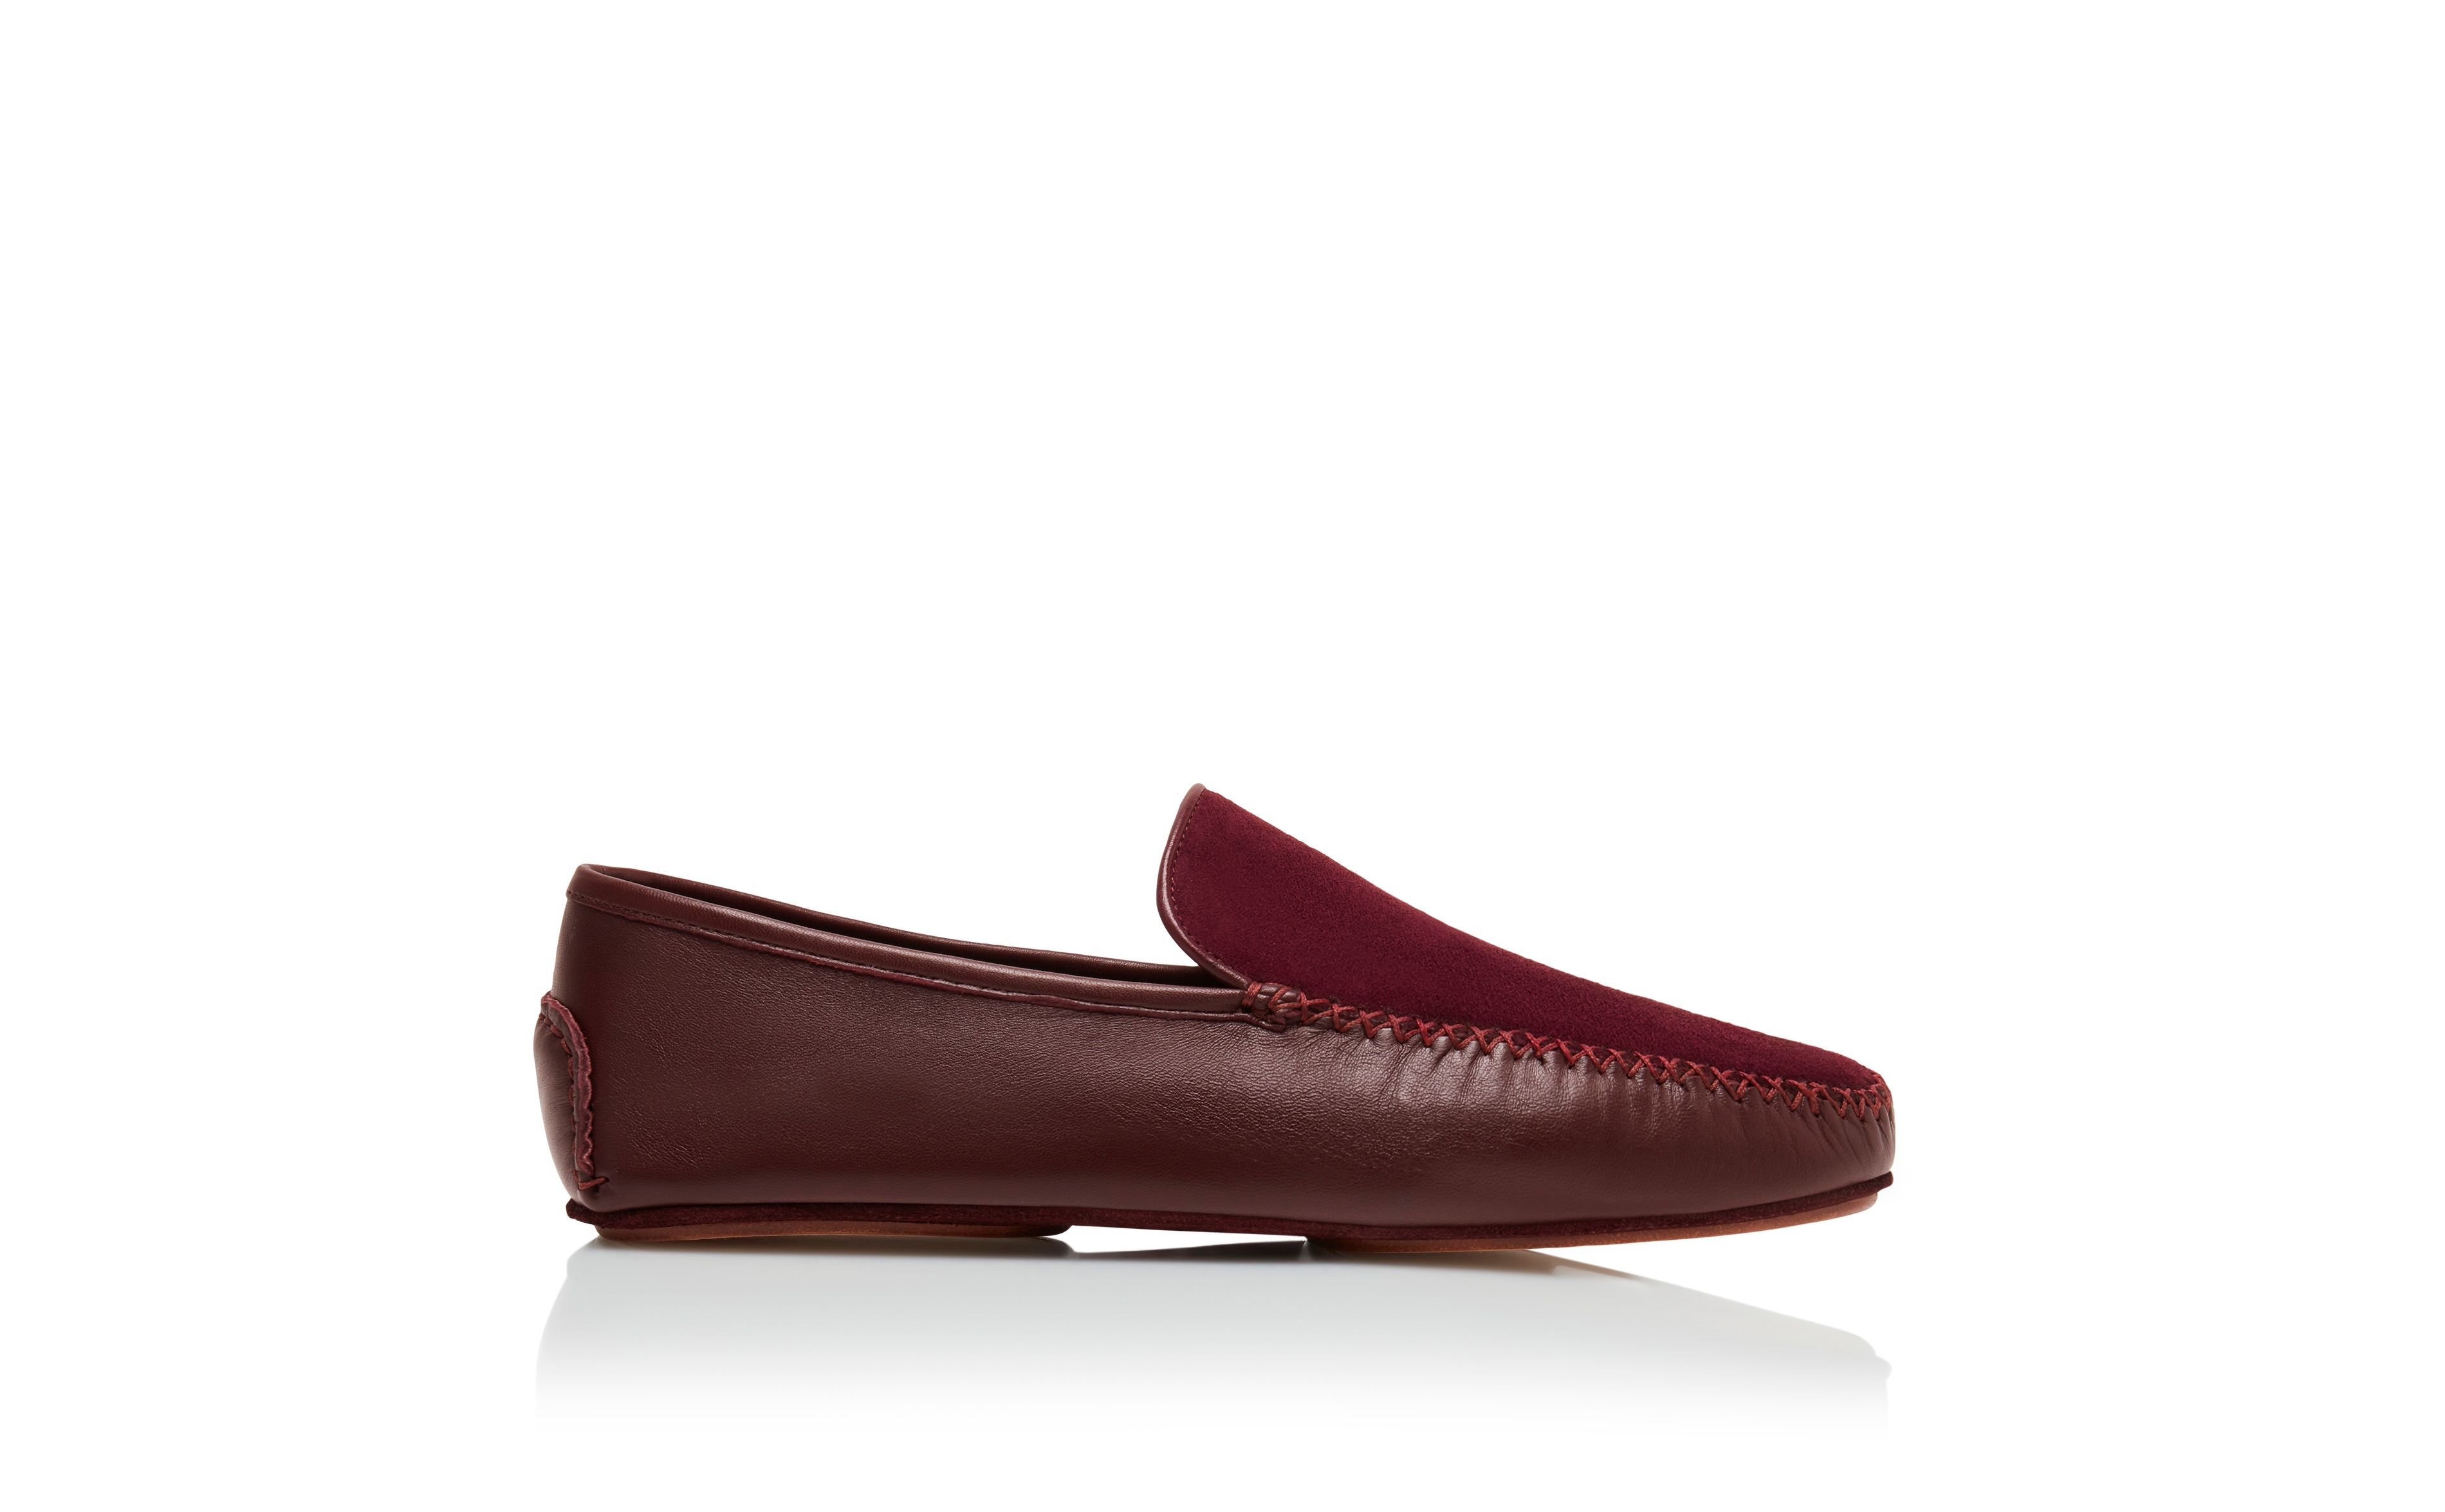 Designer Burgundy Nappa Leather and Suede Driving Shoes - Image thumbnail